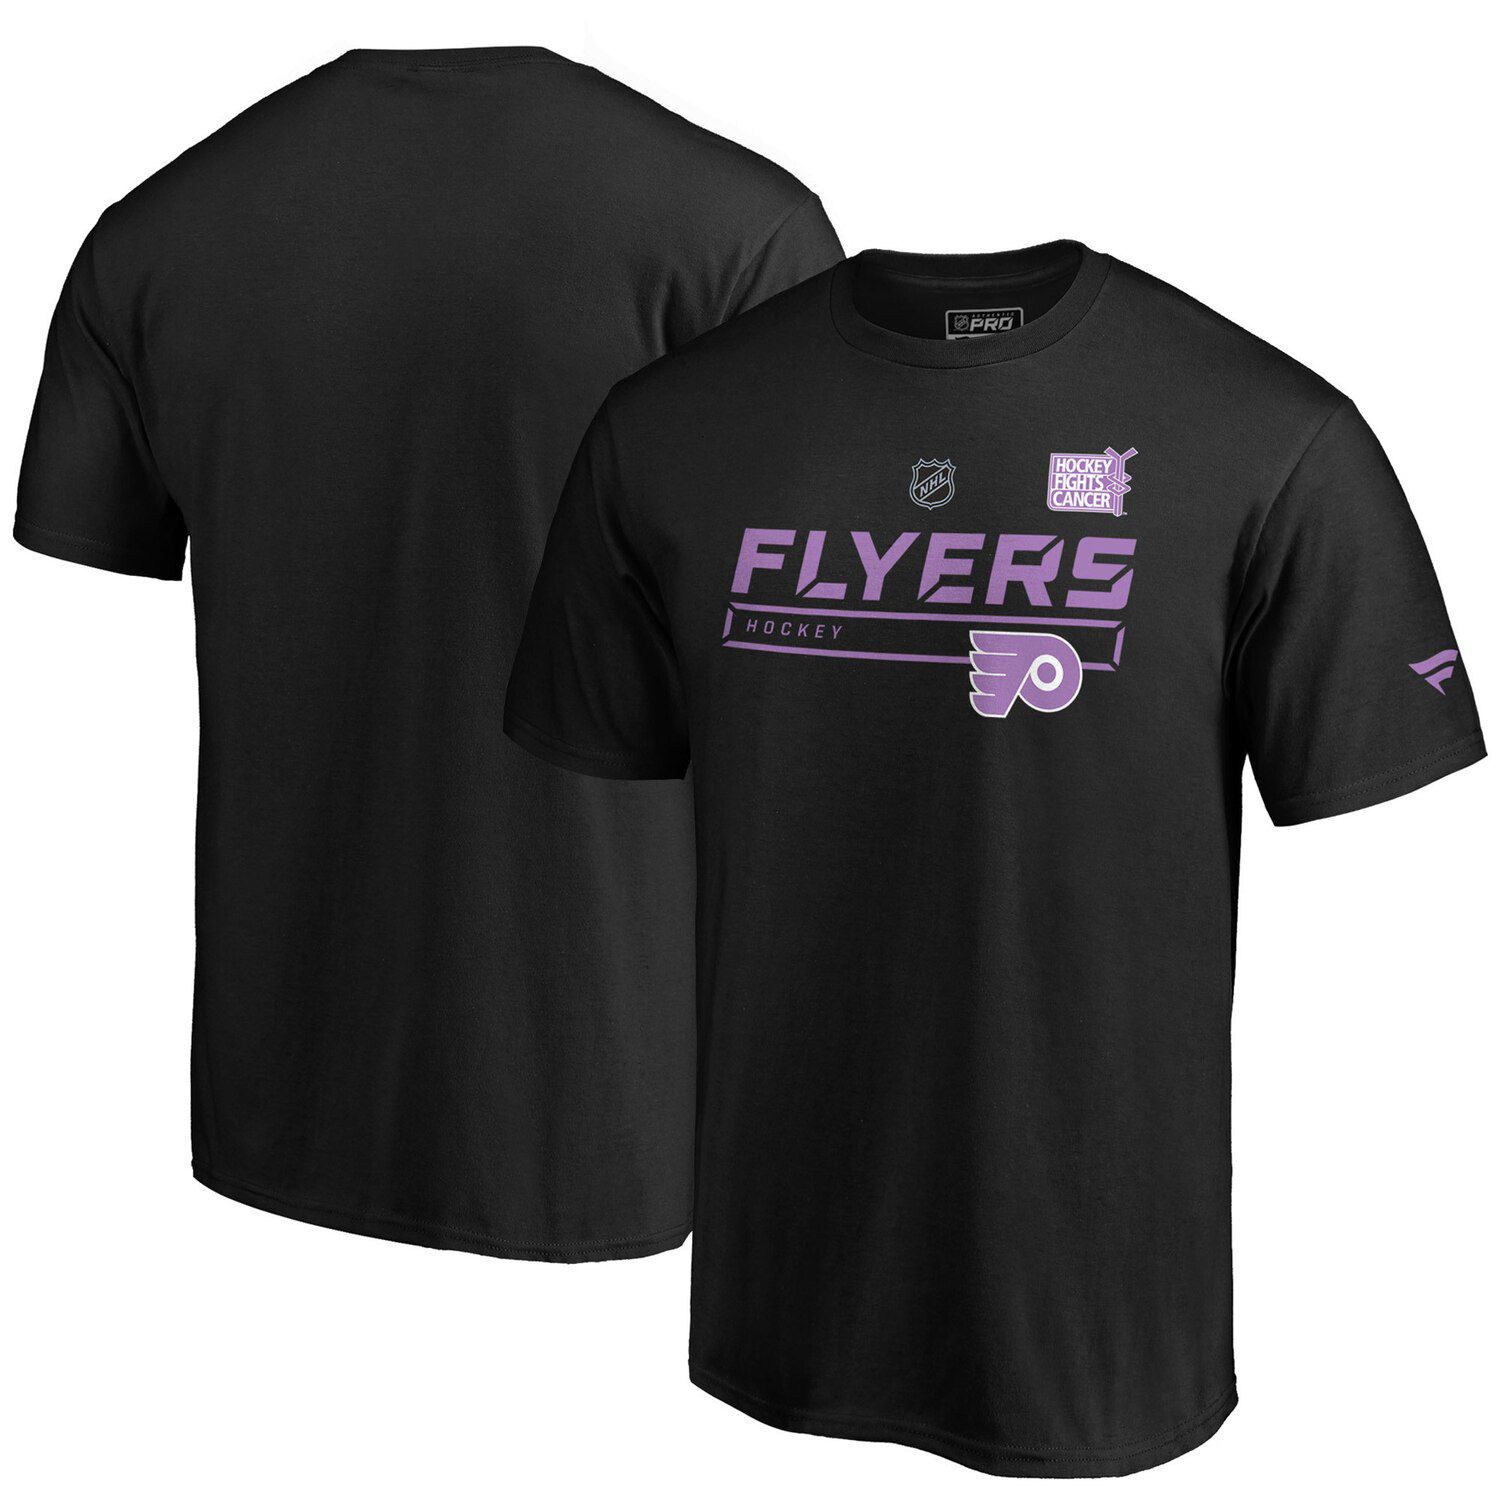 flyers hockey fights cancer